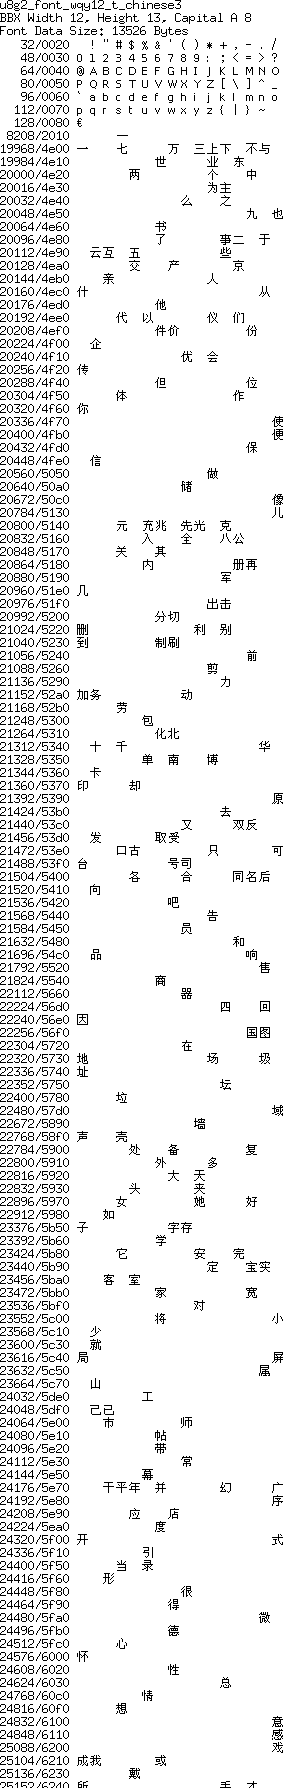 fntpic/u8g2_font_wqy12_t_chinese3.png